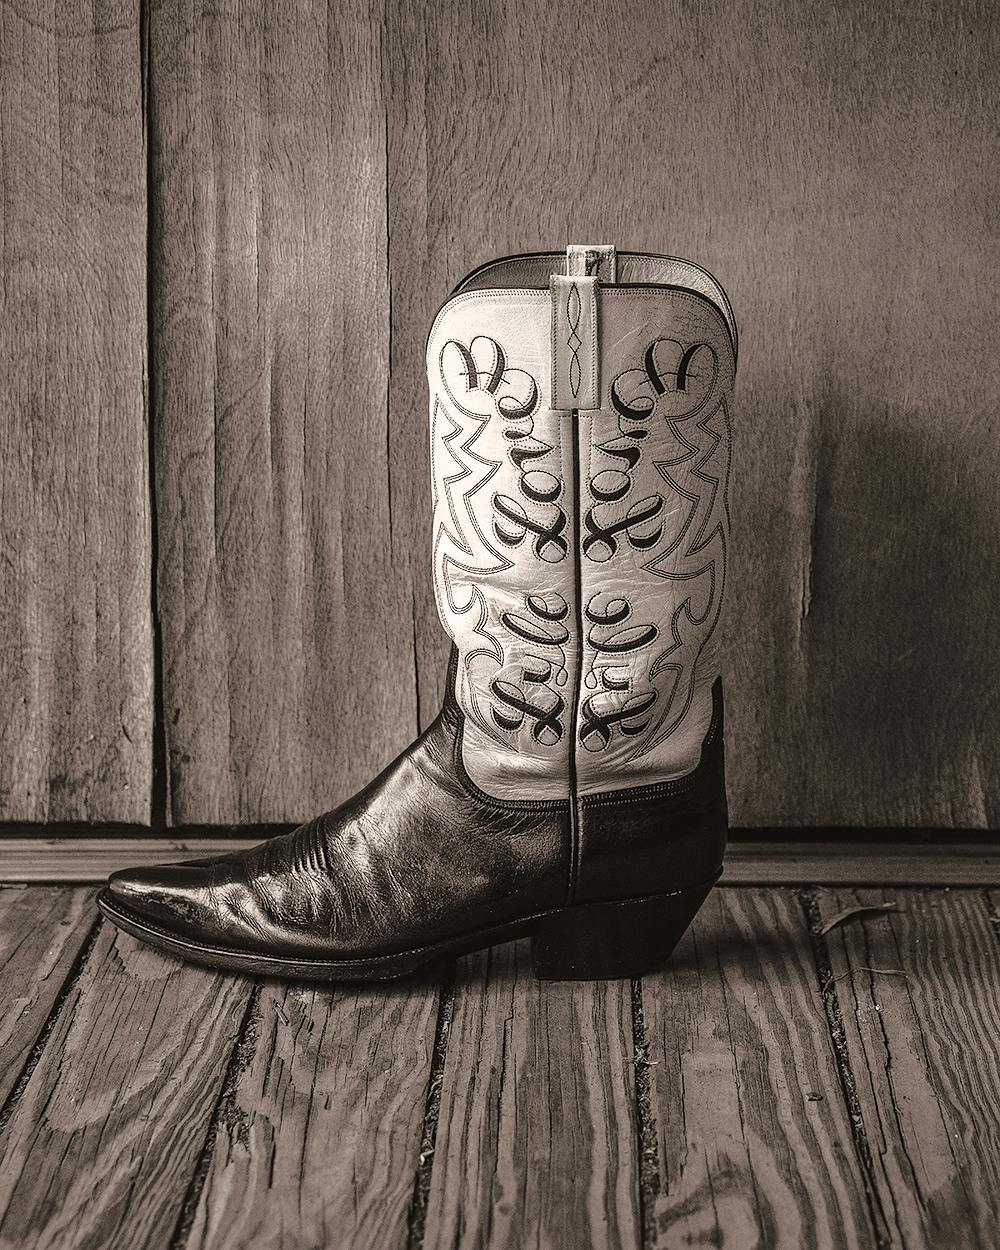 trying the white boot trend – a lonestar state of southern